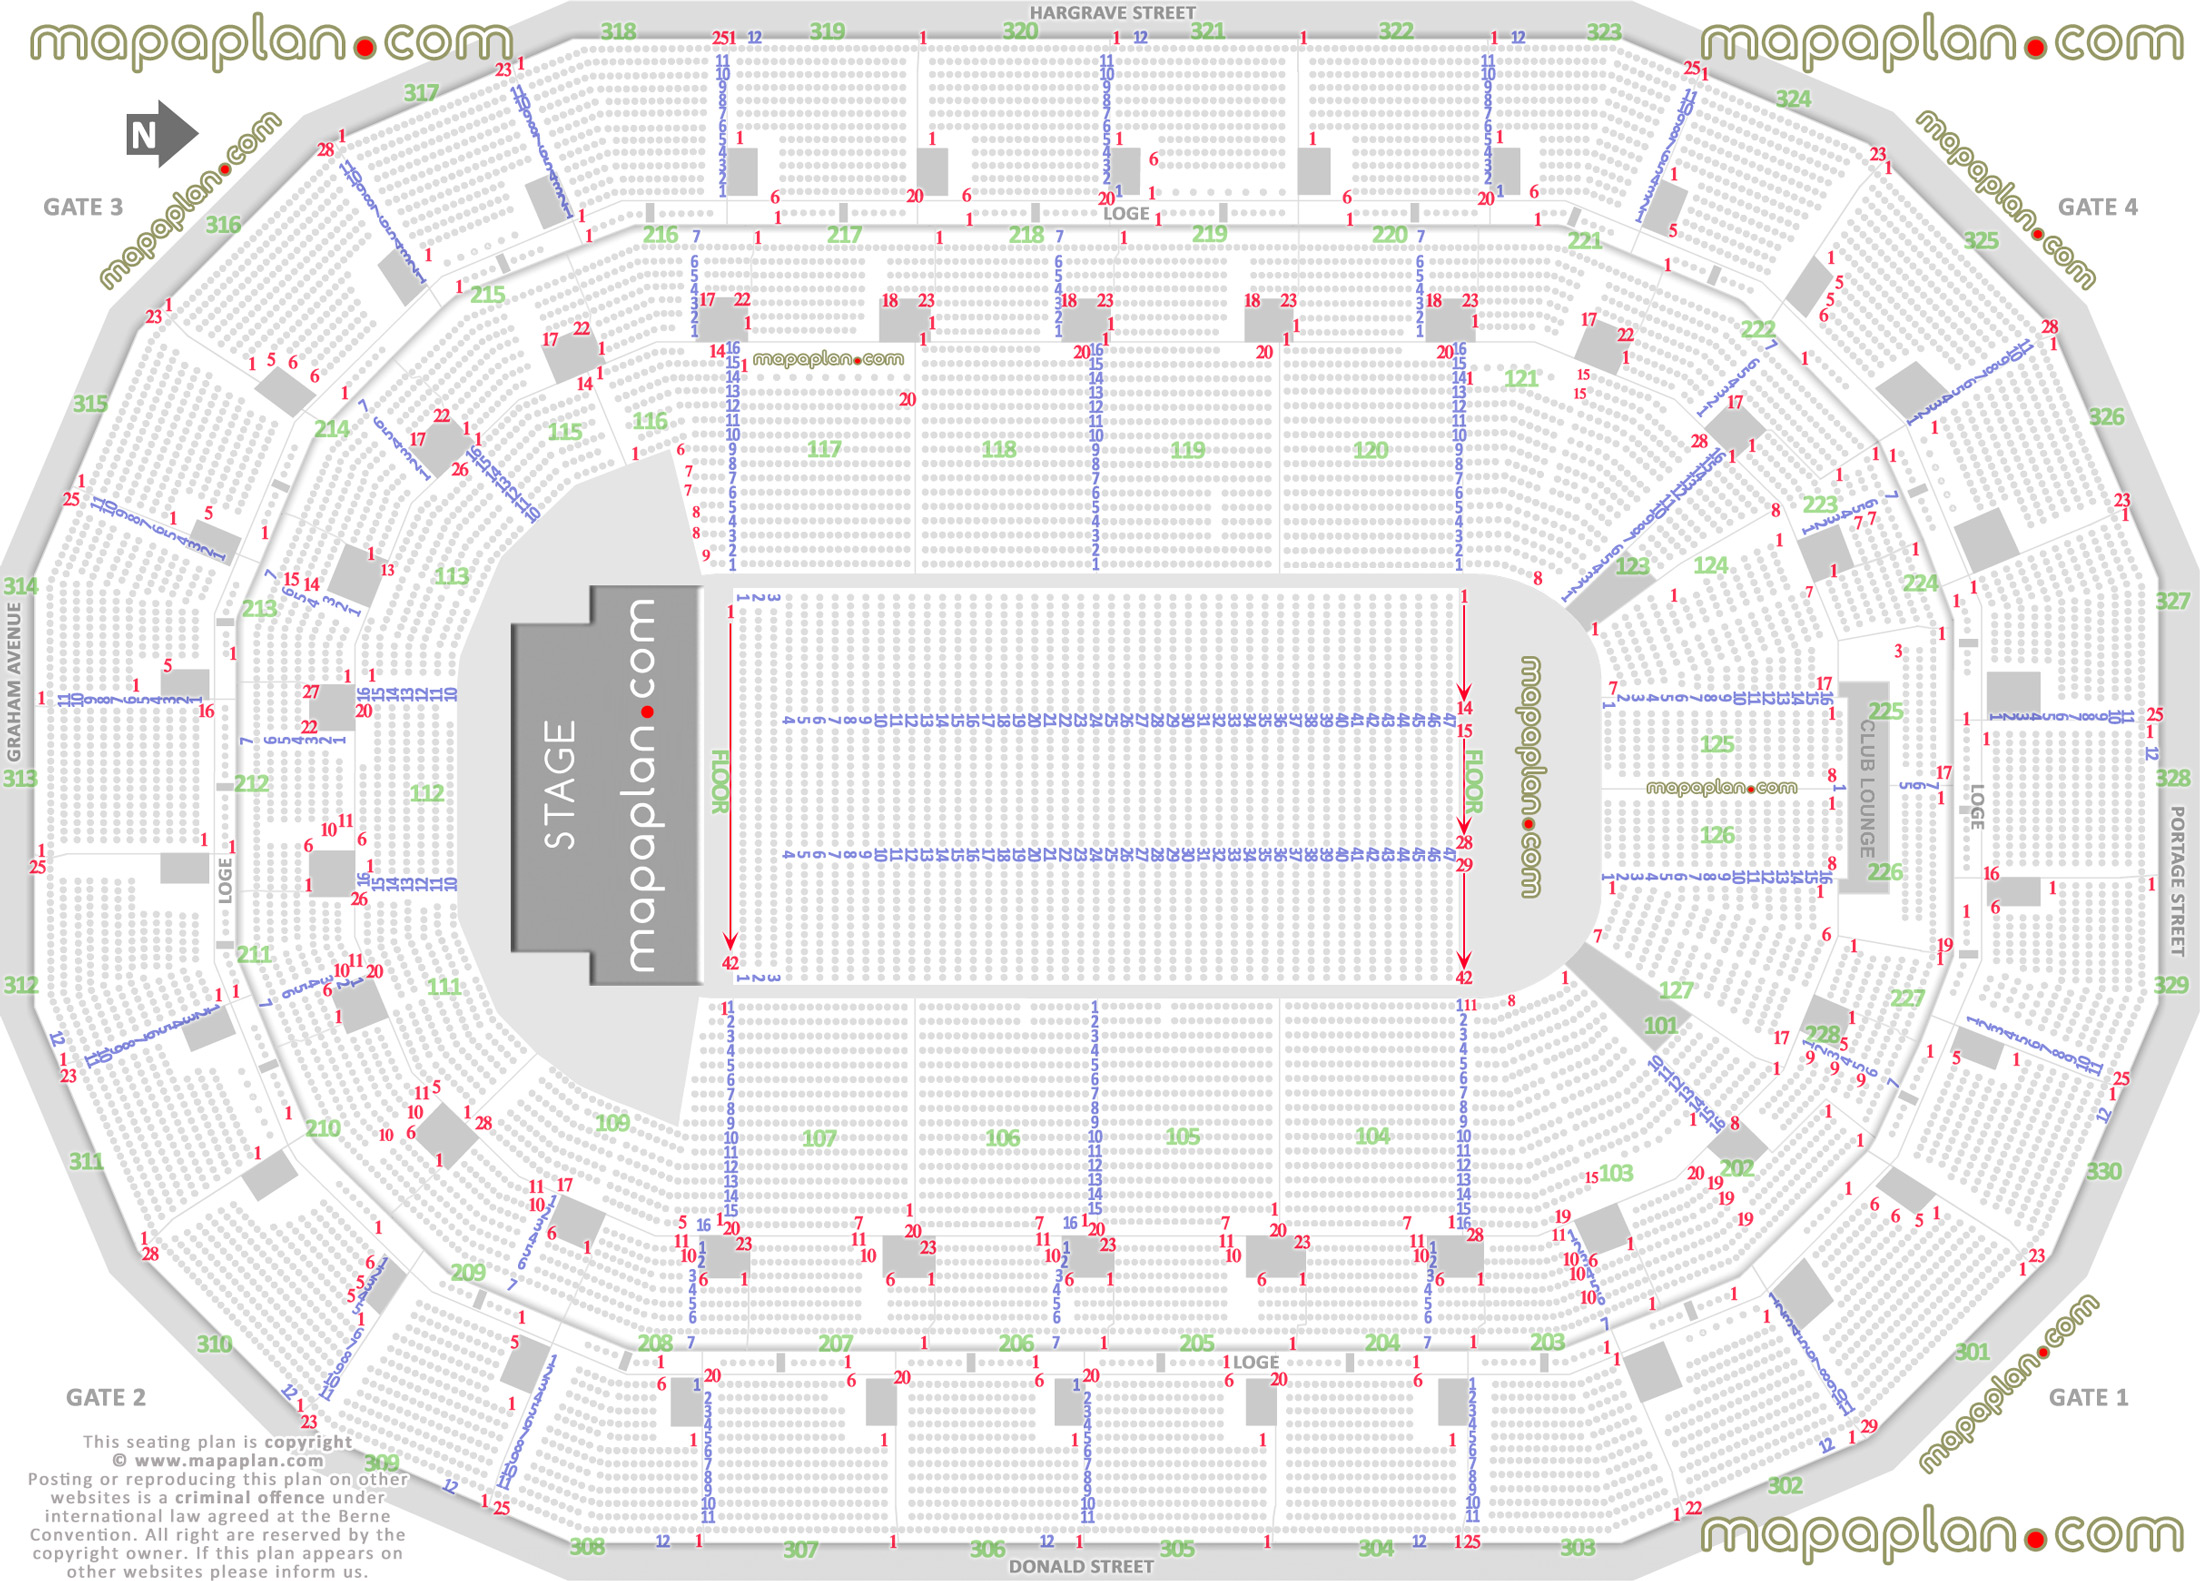 detailed seat row numbers end stage concert sections floor plan map arena lower upper level layout Winnipeg MTS Centre seating chart